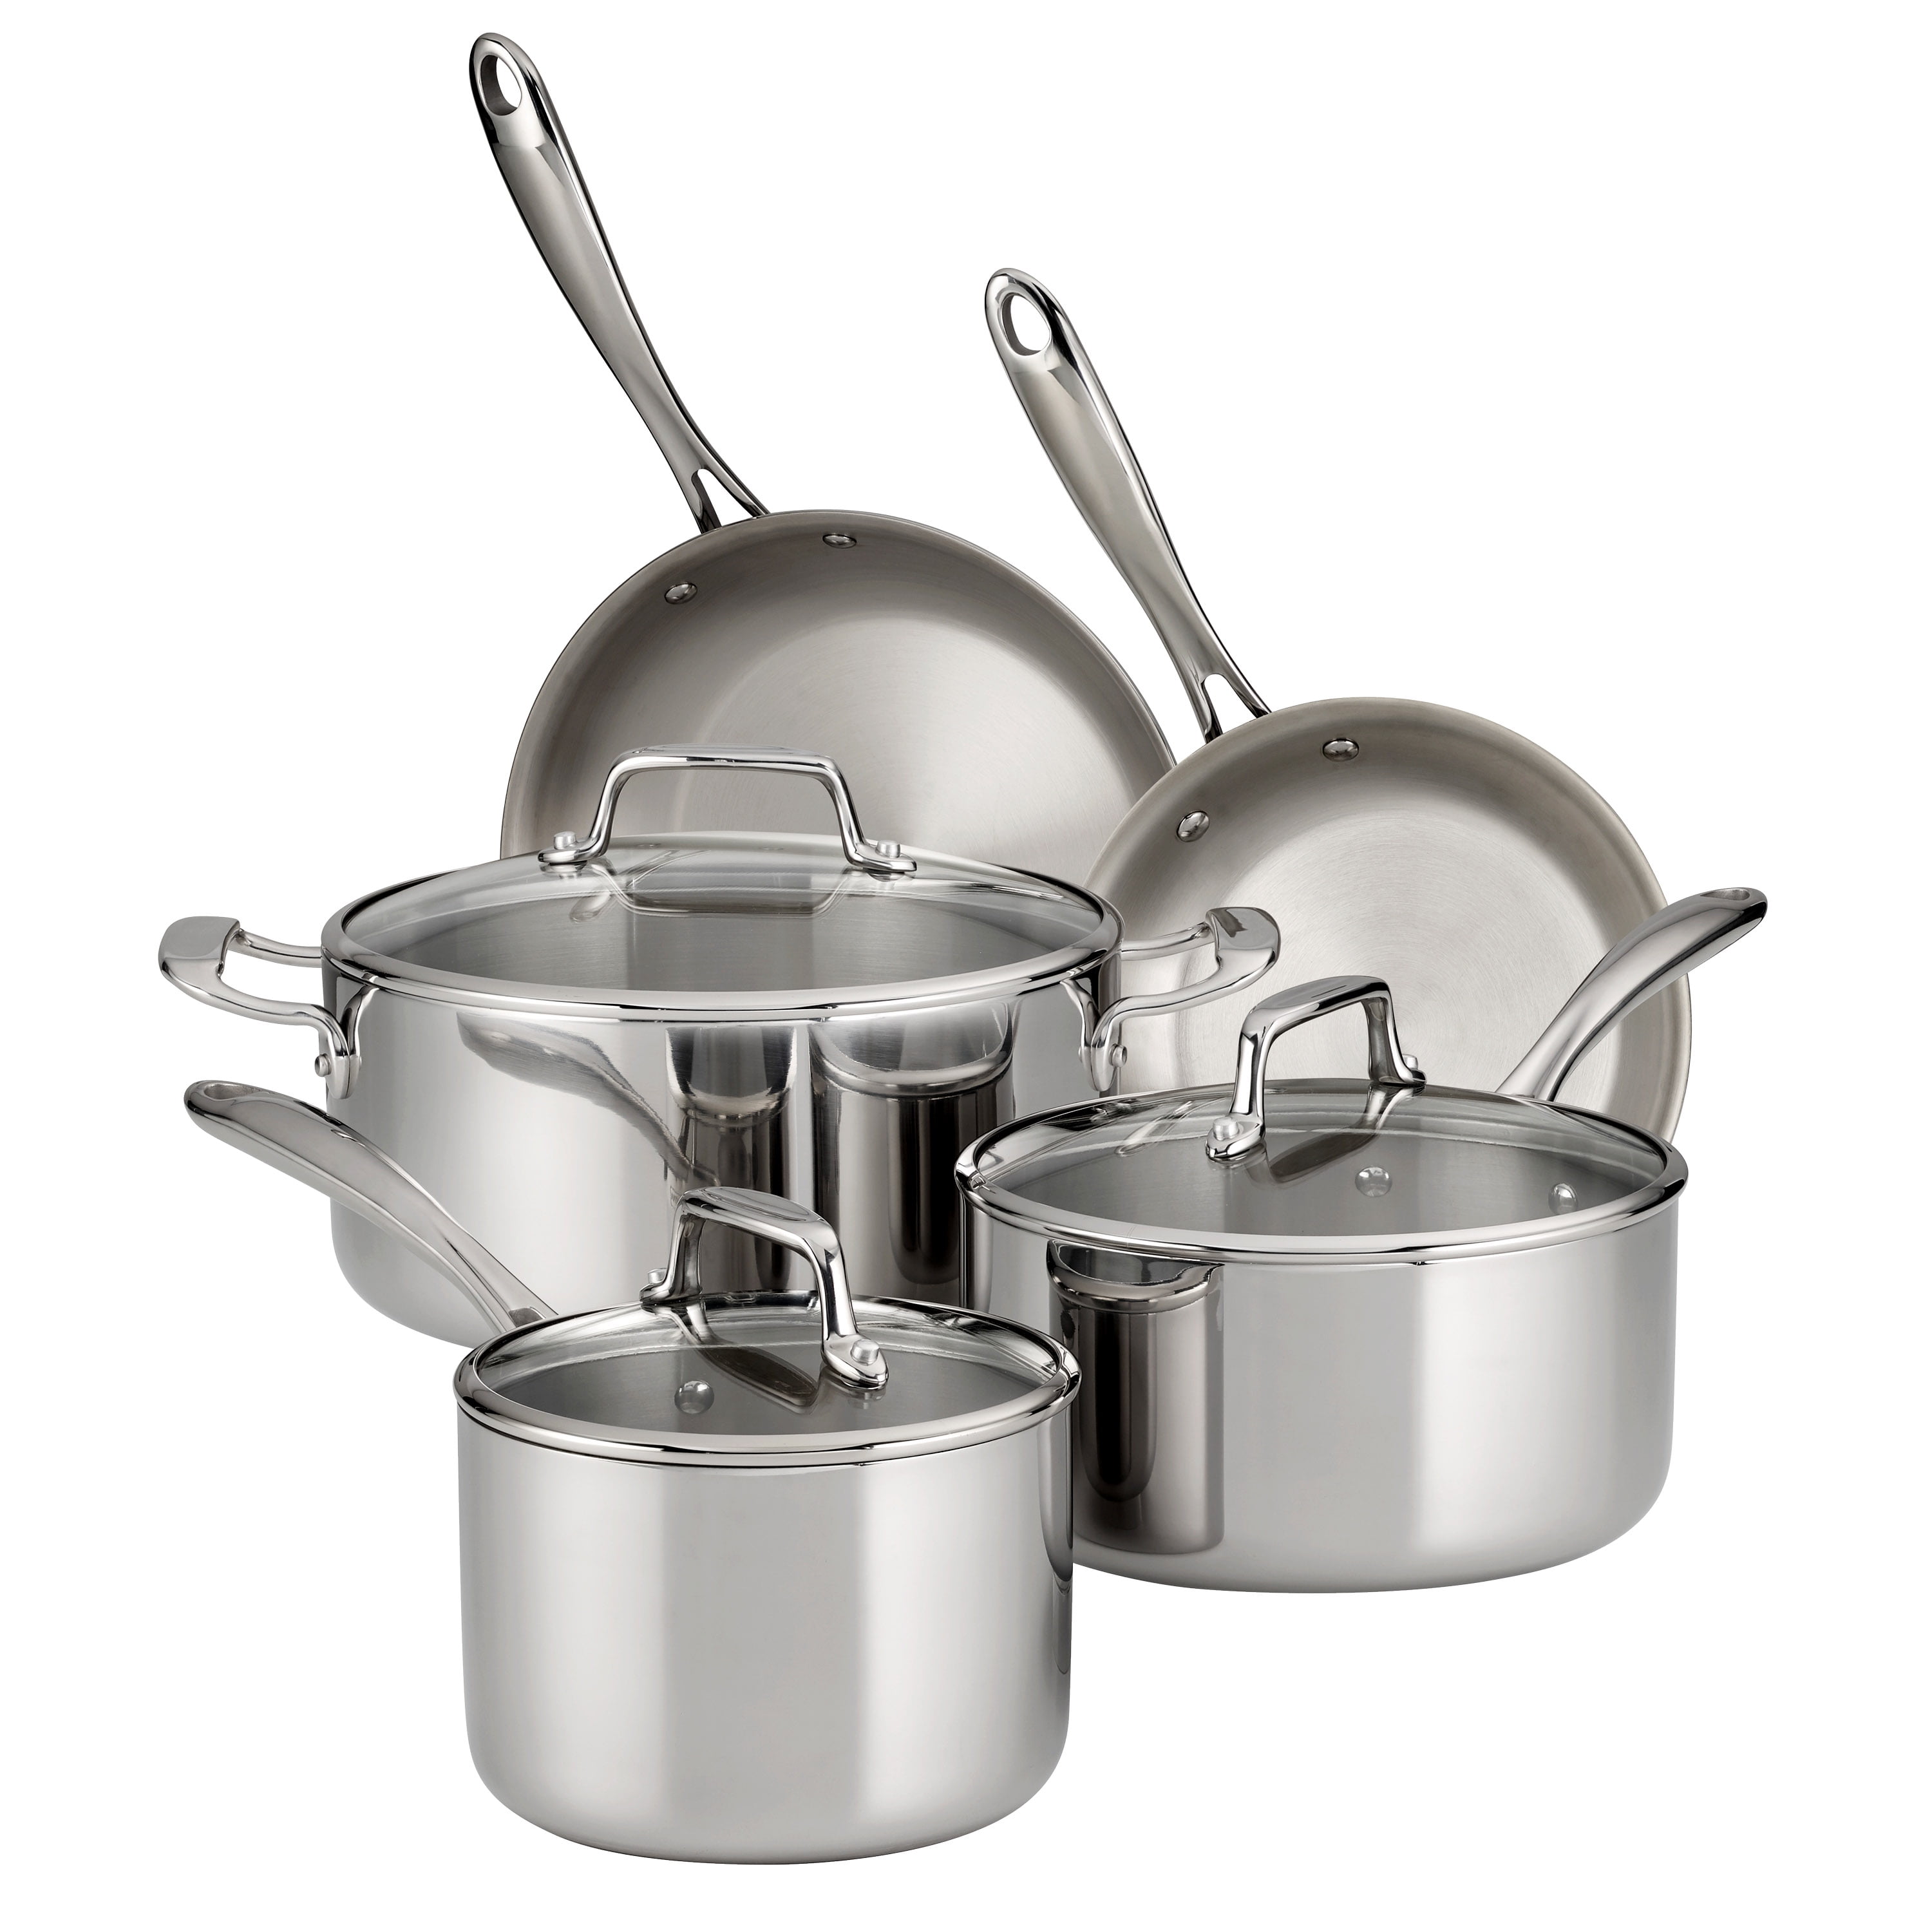 Details about   Sole Samira Glass Covered 3-Piece Steel Cookware Set